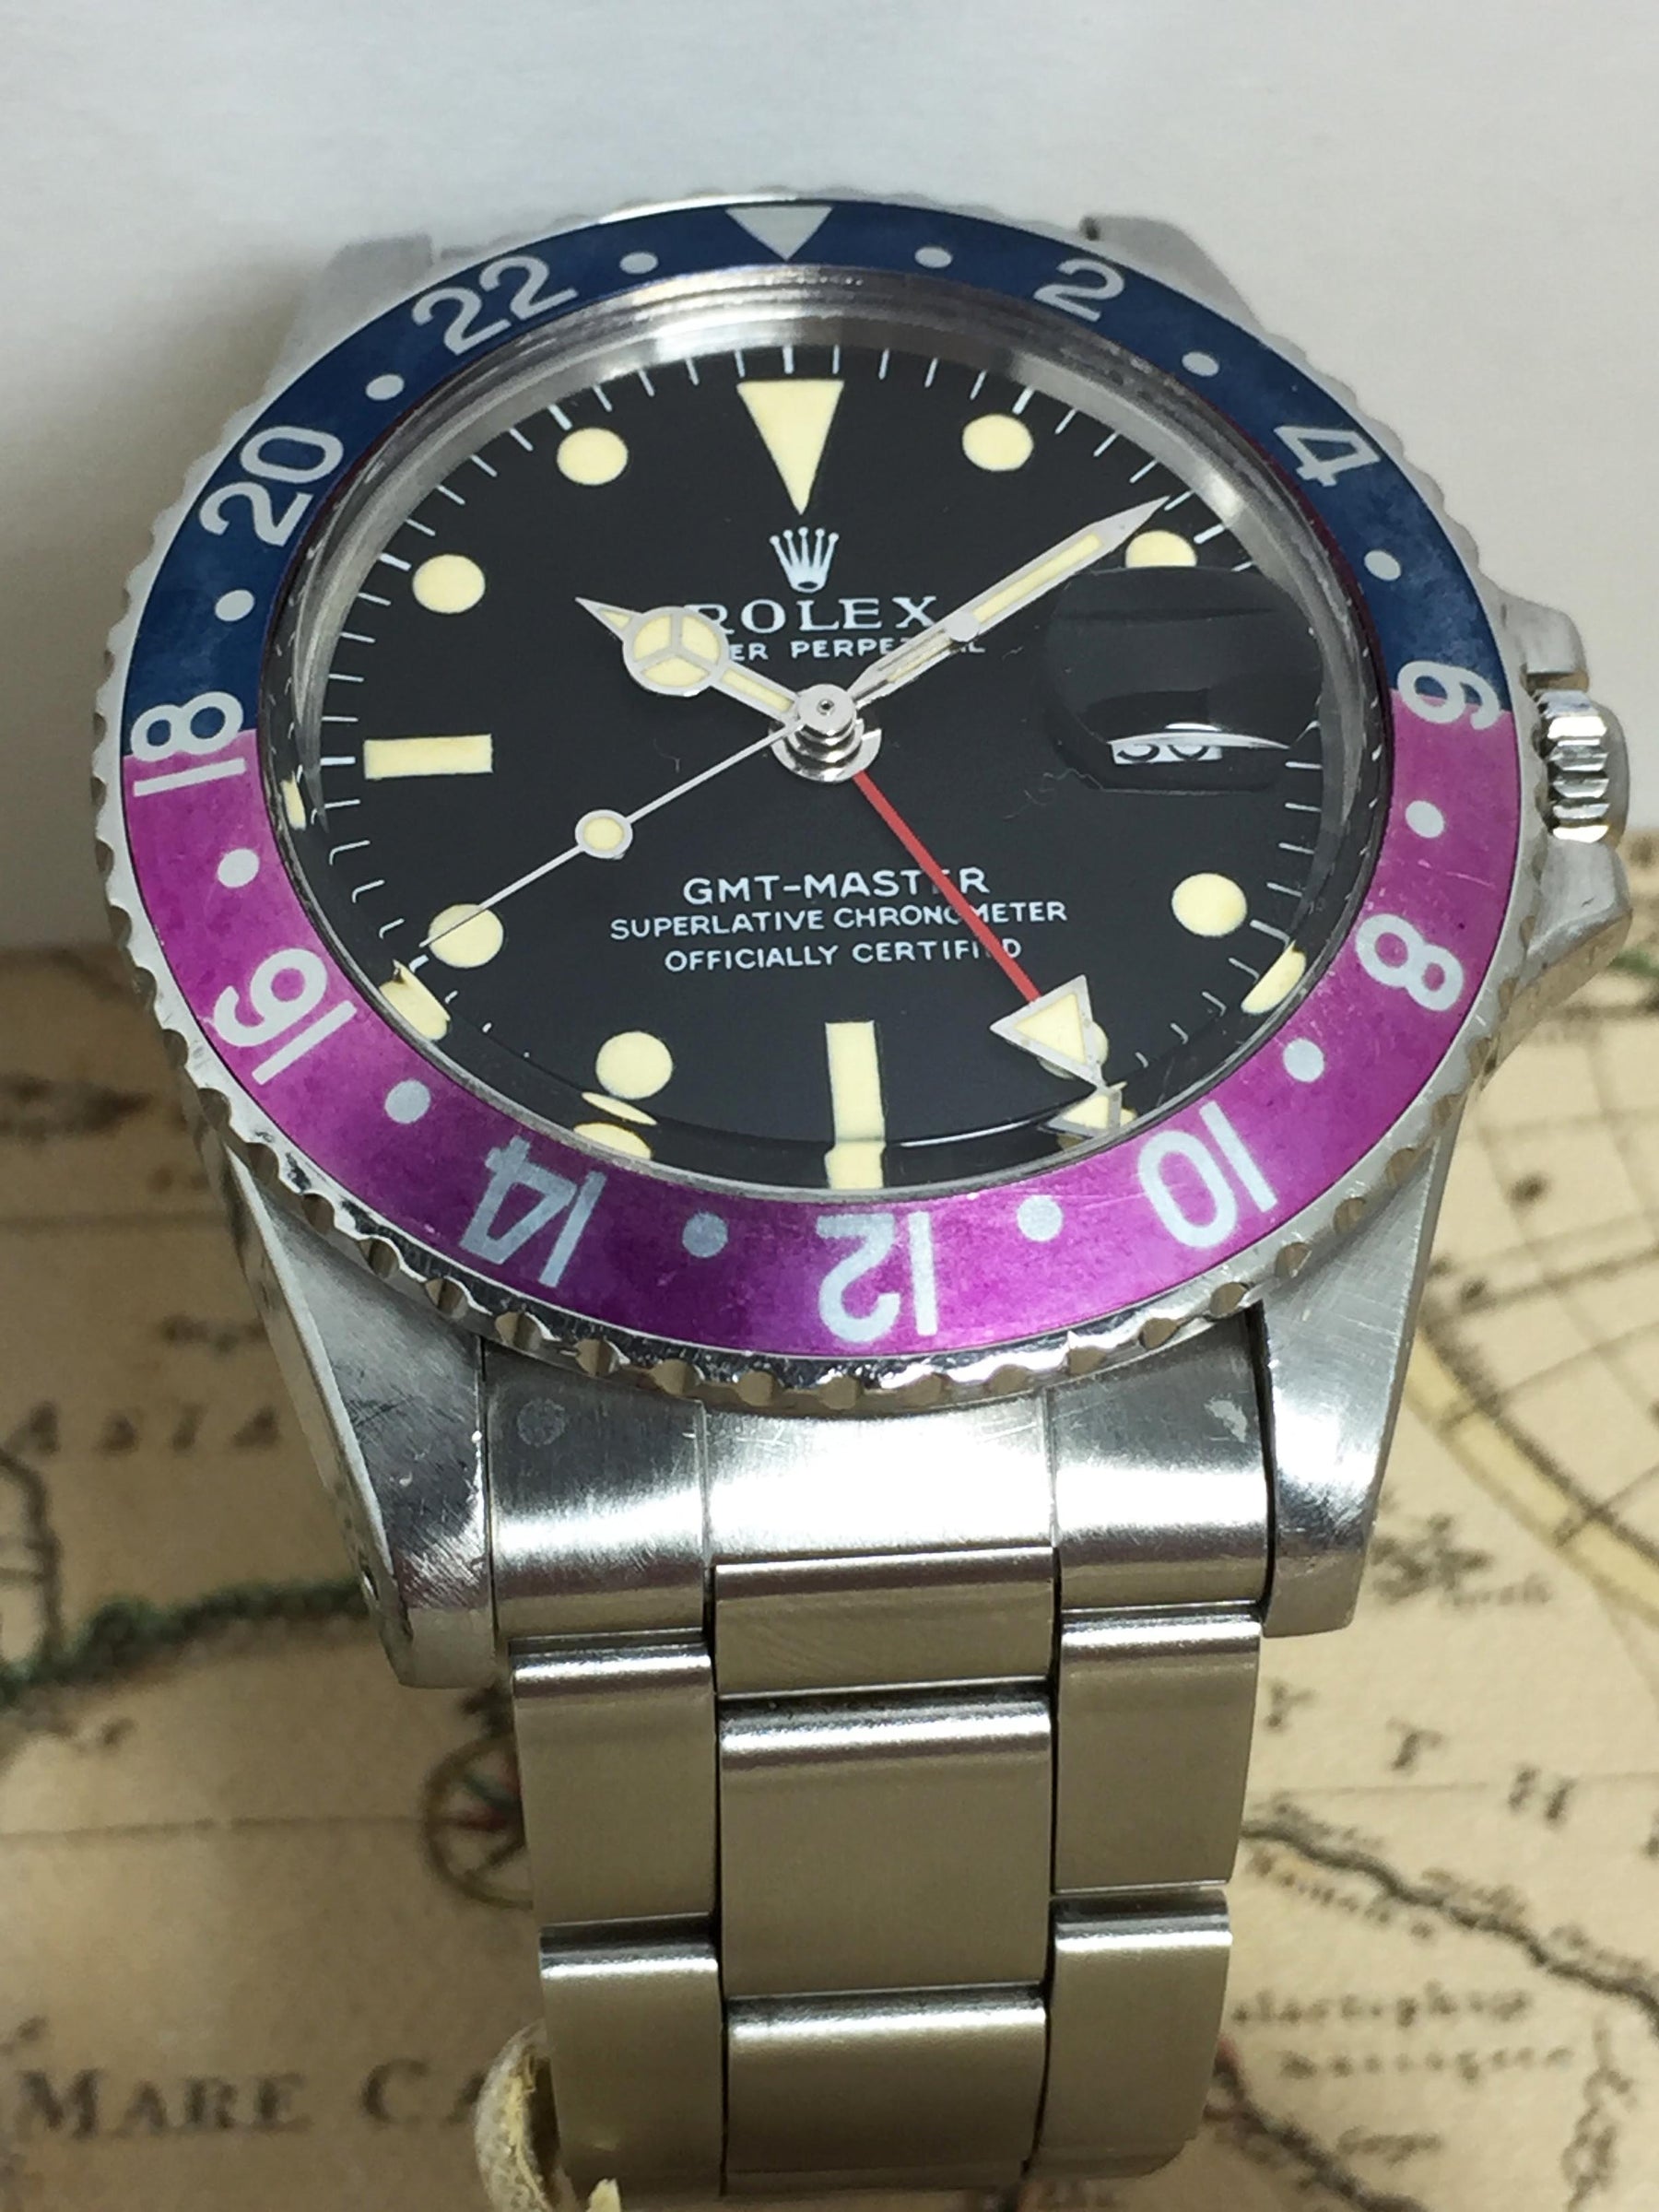 1968 Rolex GMT Master MK1 Fuchsia Ref. 1675 (with Box & Papers)